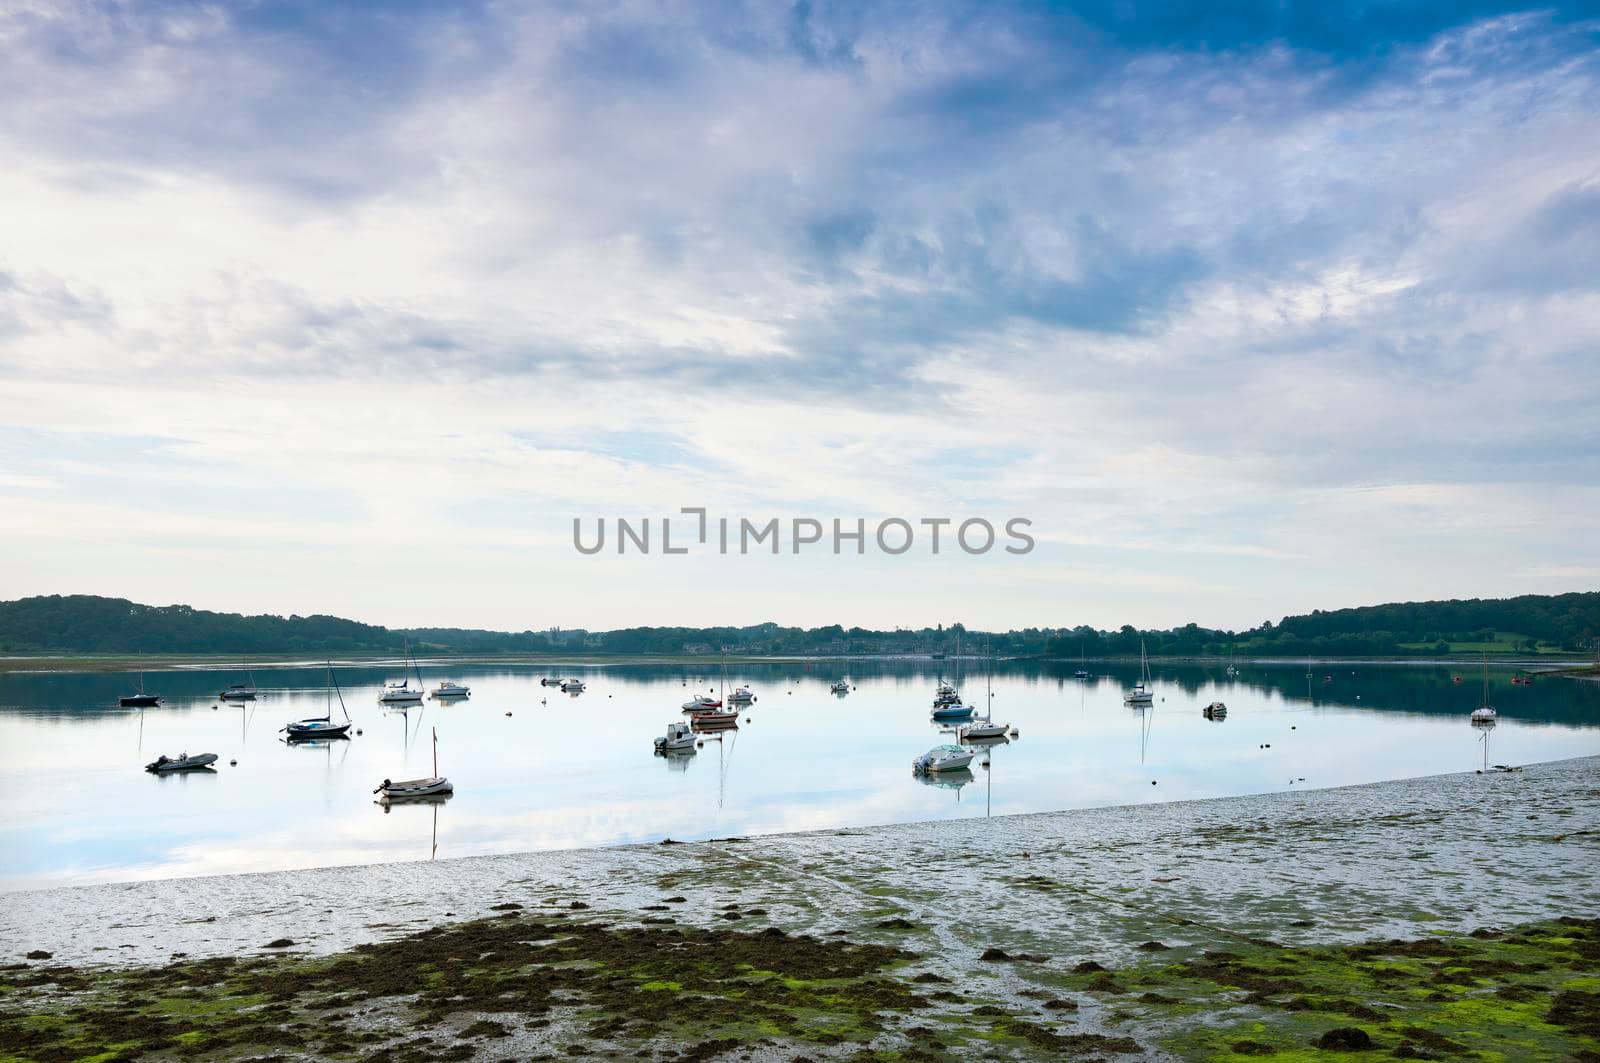 boats in river la rance in french region of brittany at sunrise in summer by ahavelaar